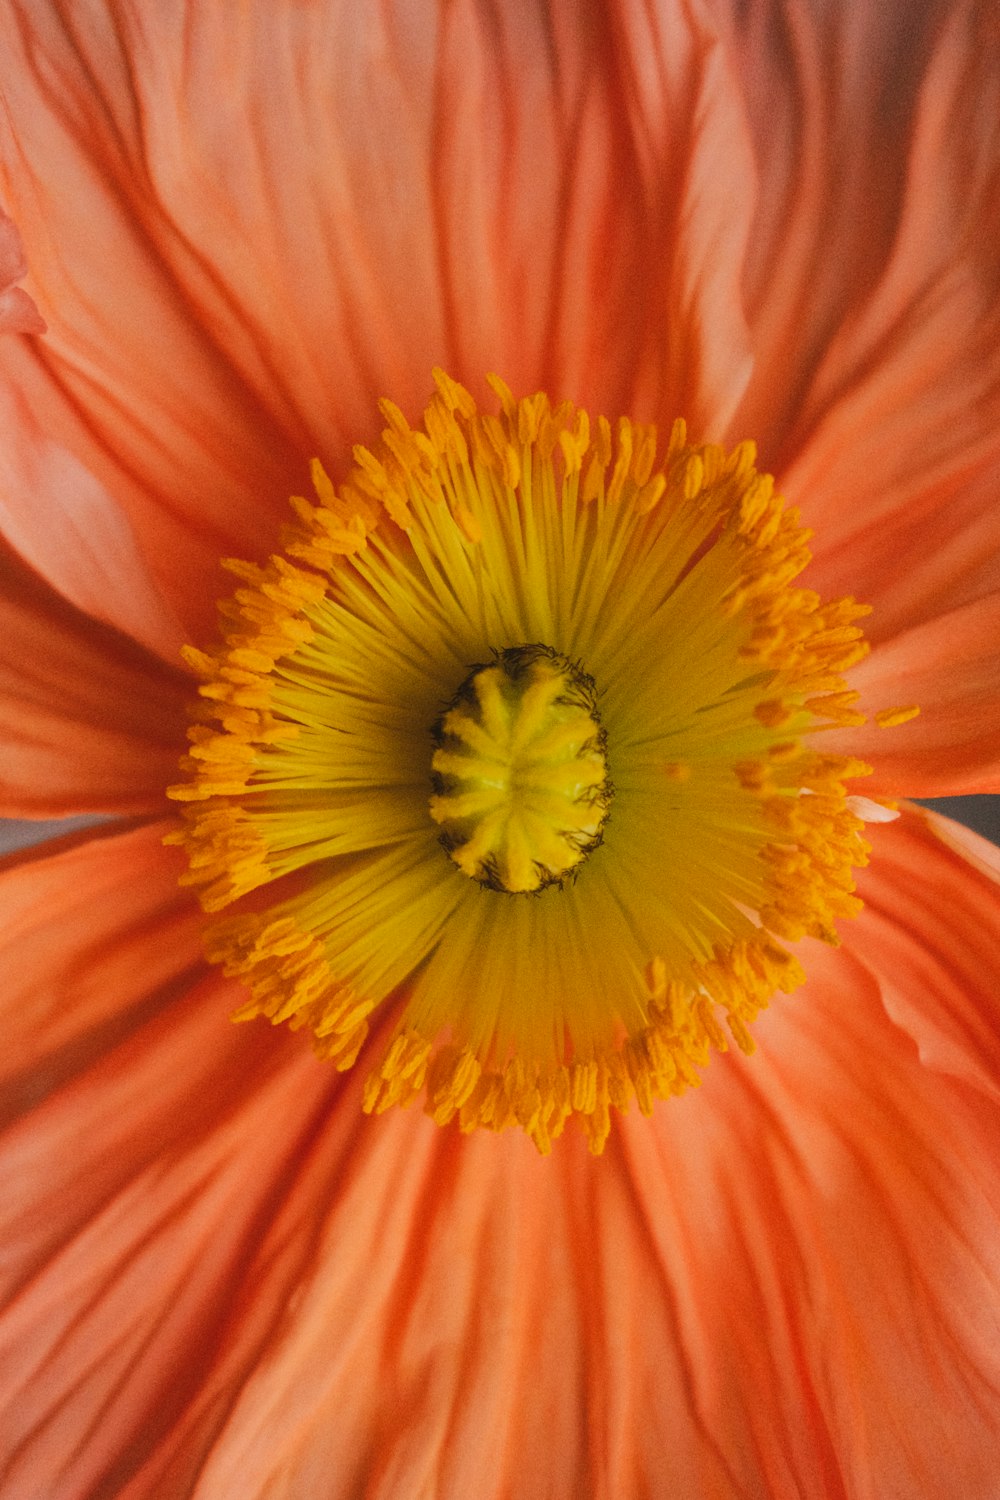 a close up of a flower with a yellow center